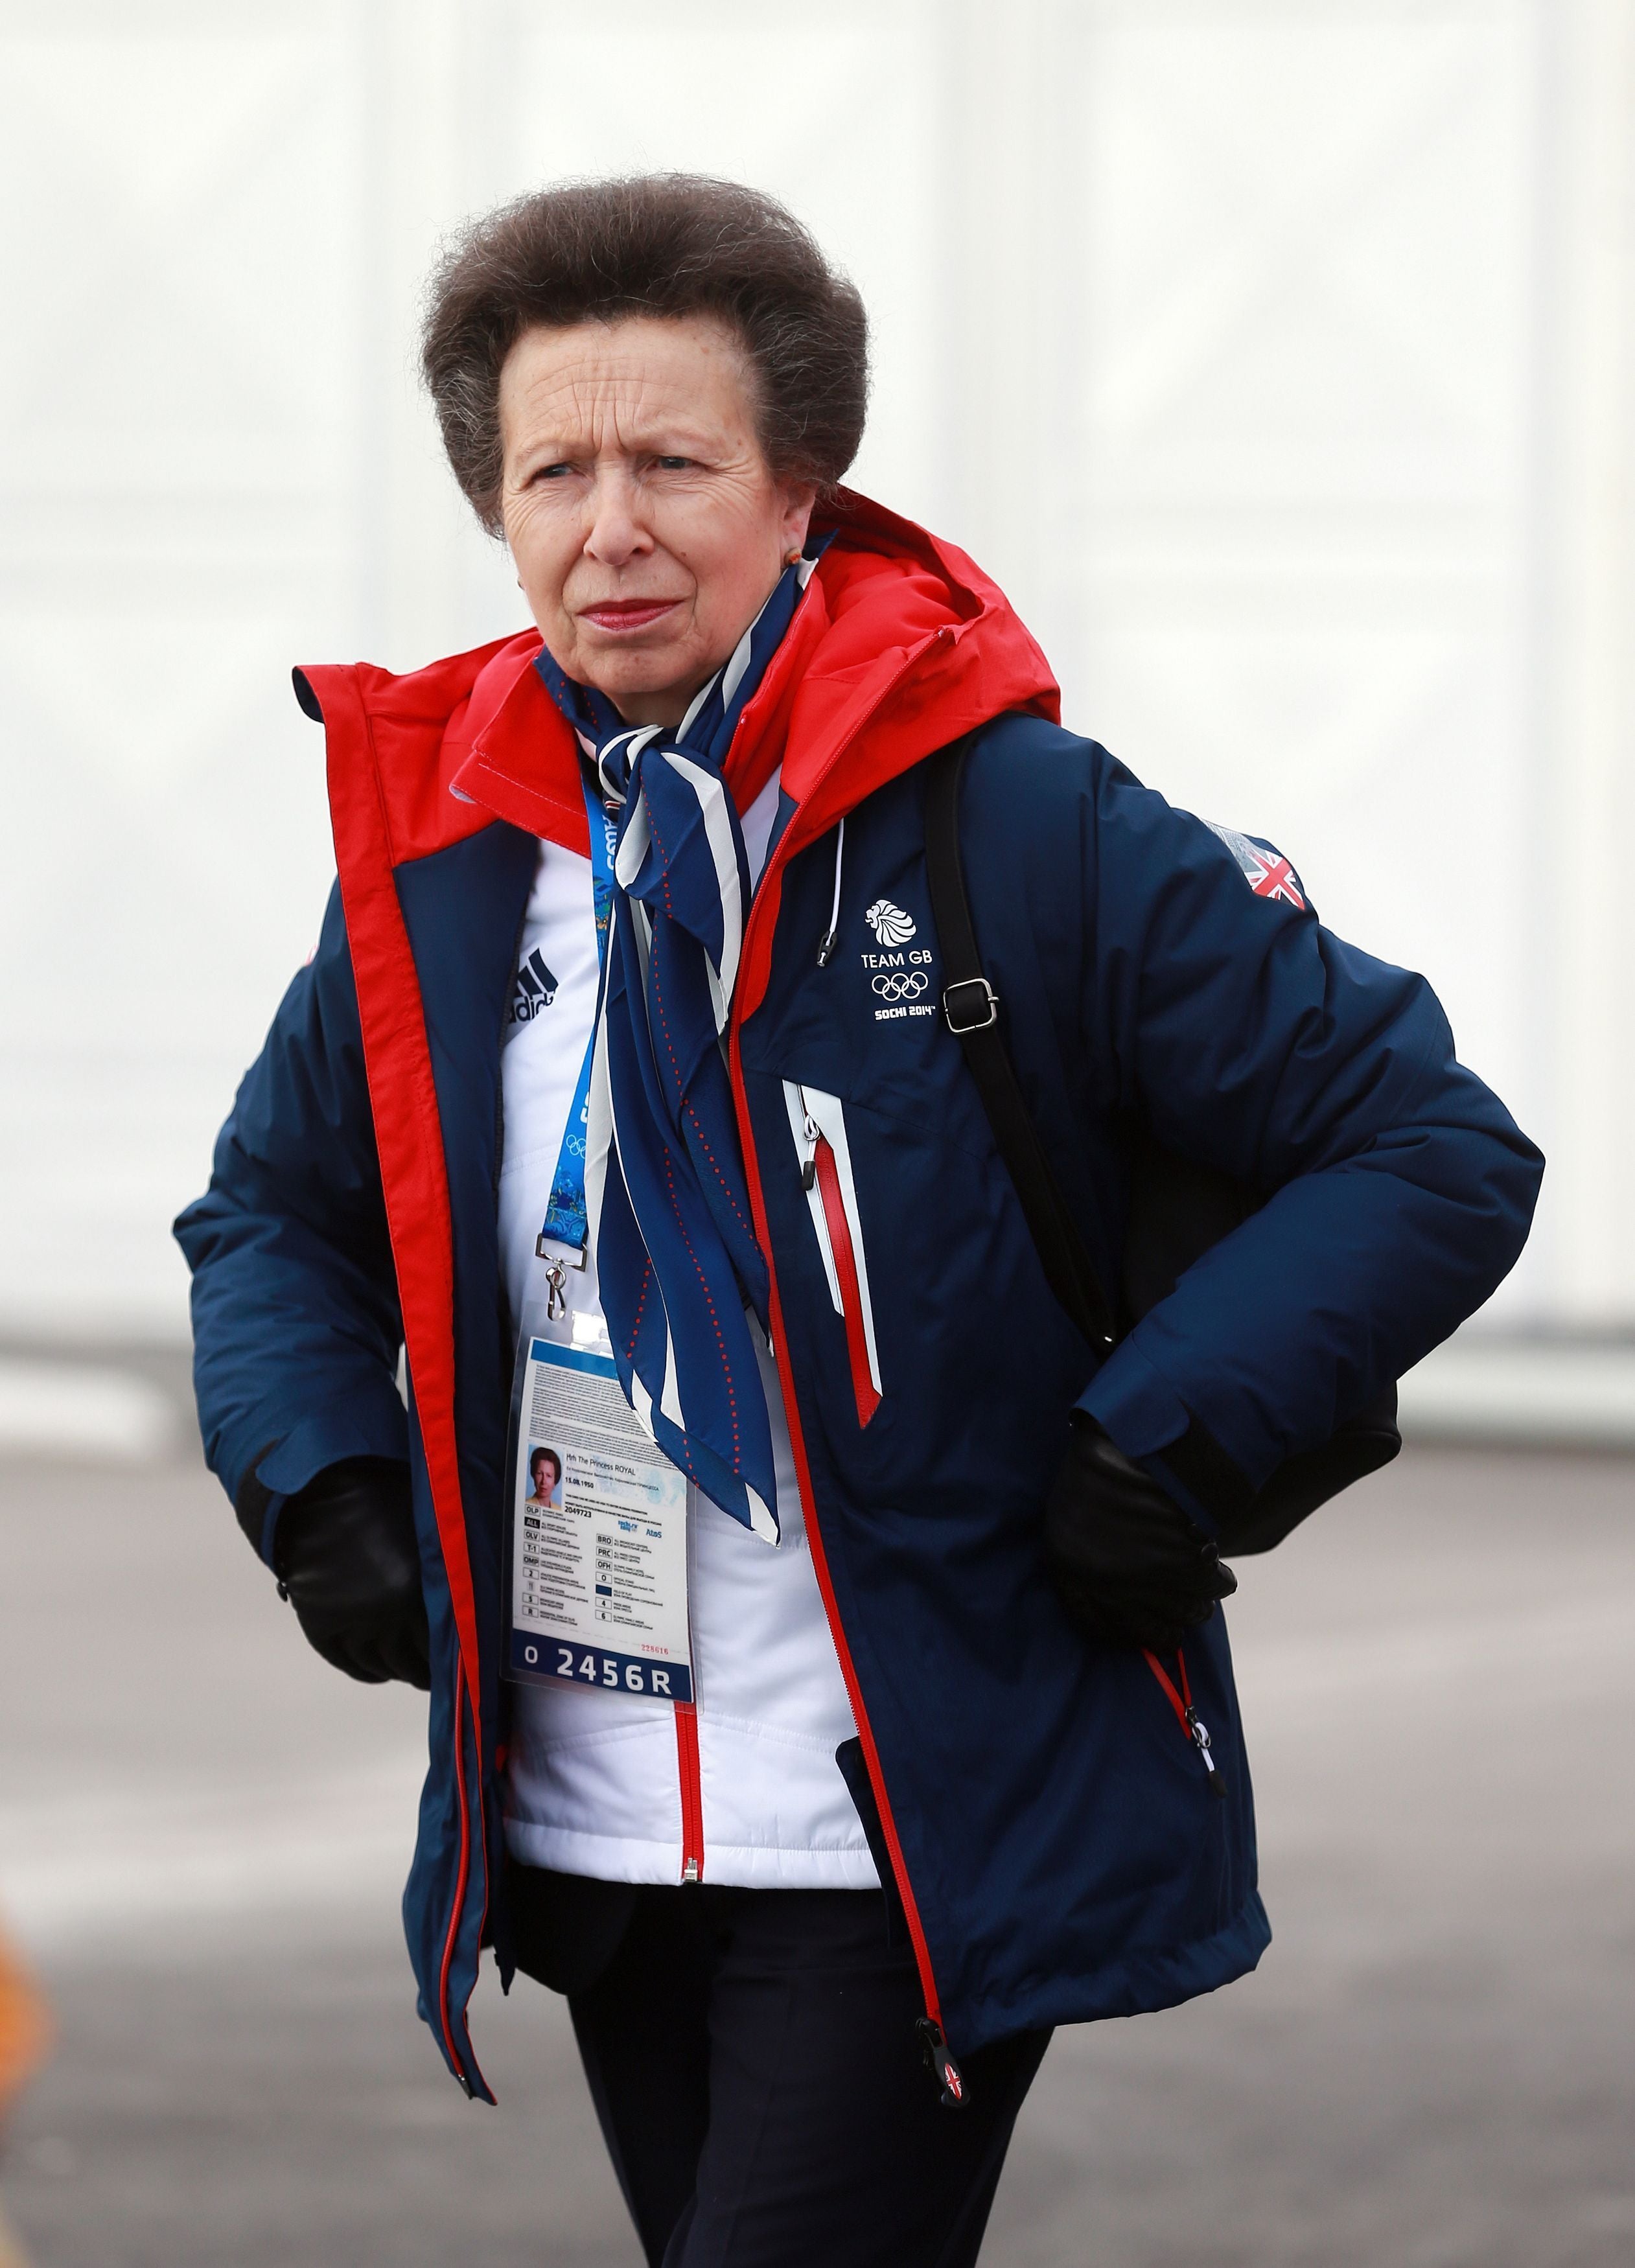 The Princess Royal during the Team GB welcome ceremony at the 2014 Sochi Winter Olympics (David Davies/PA)